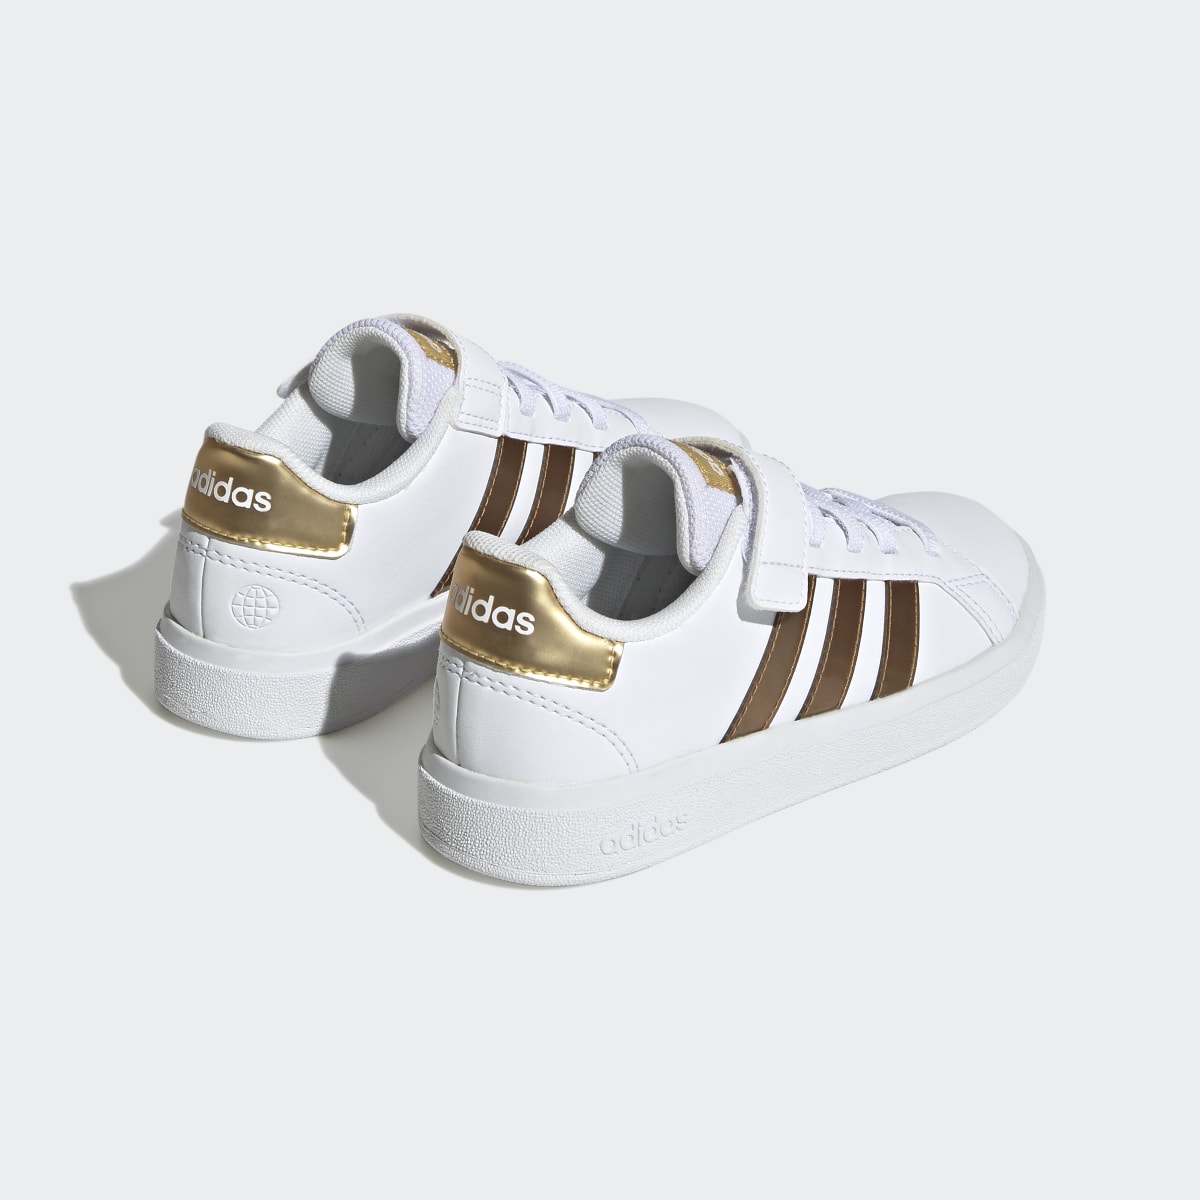 Adidas Grand Court Sustainable Elastic Lace and Top Strap Shoes. 6